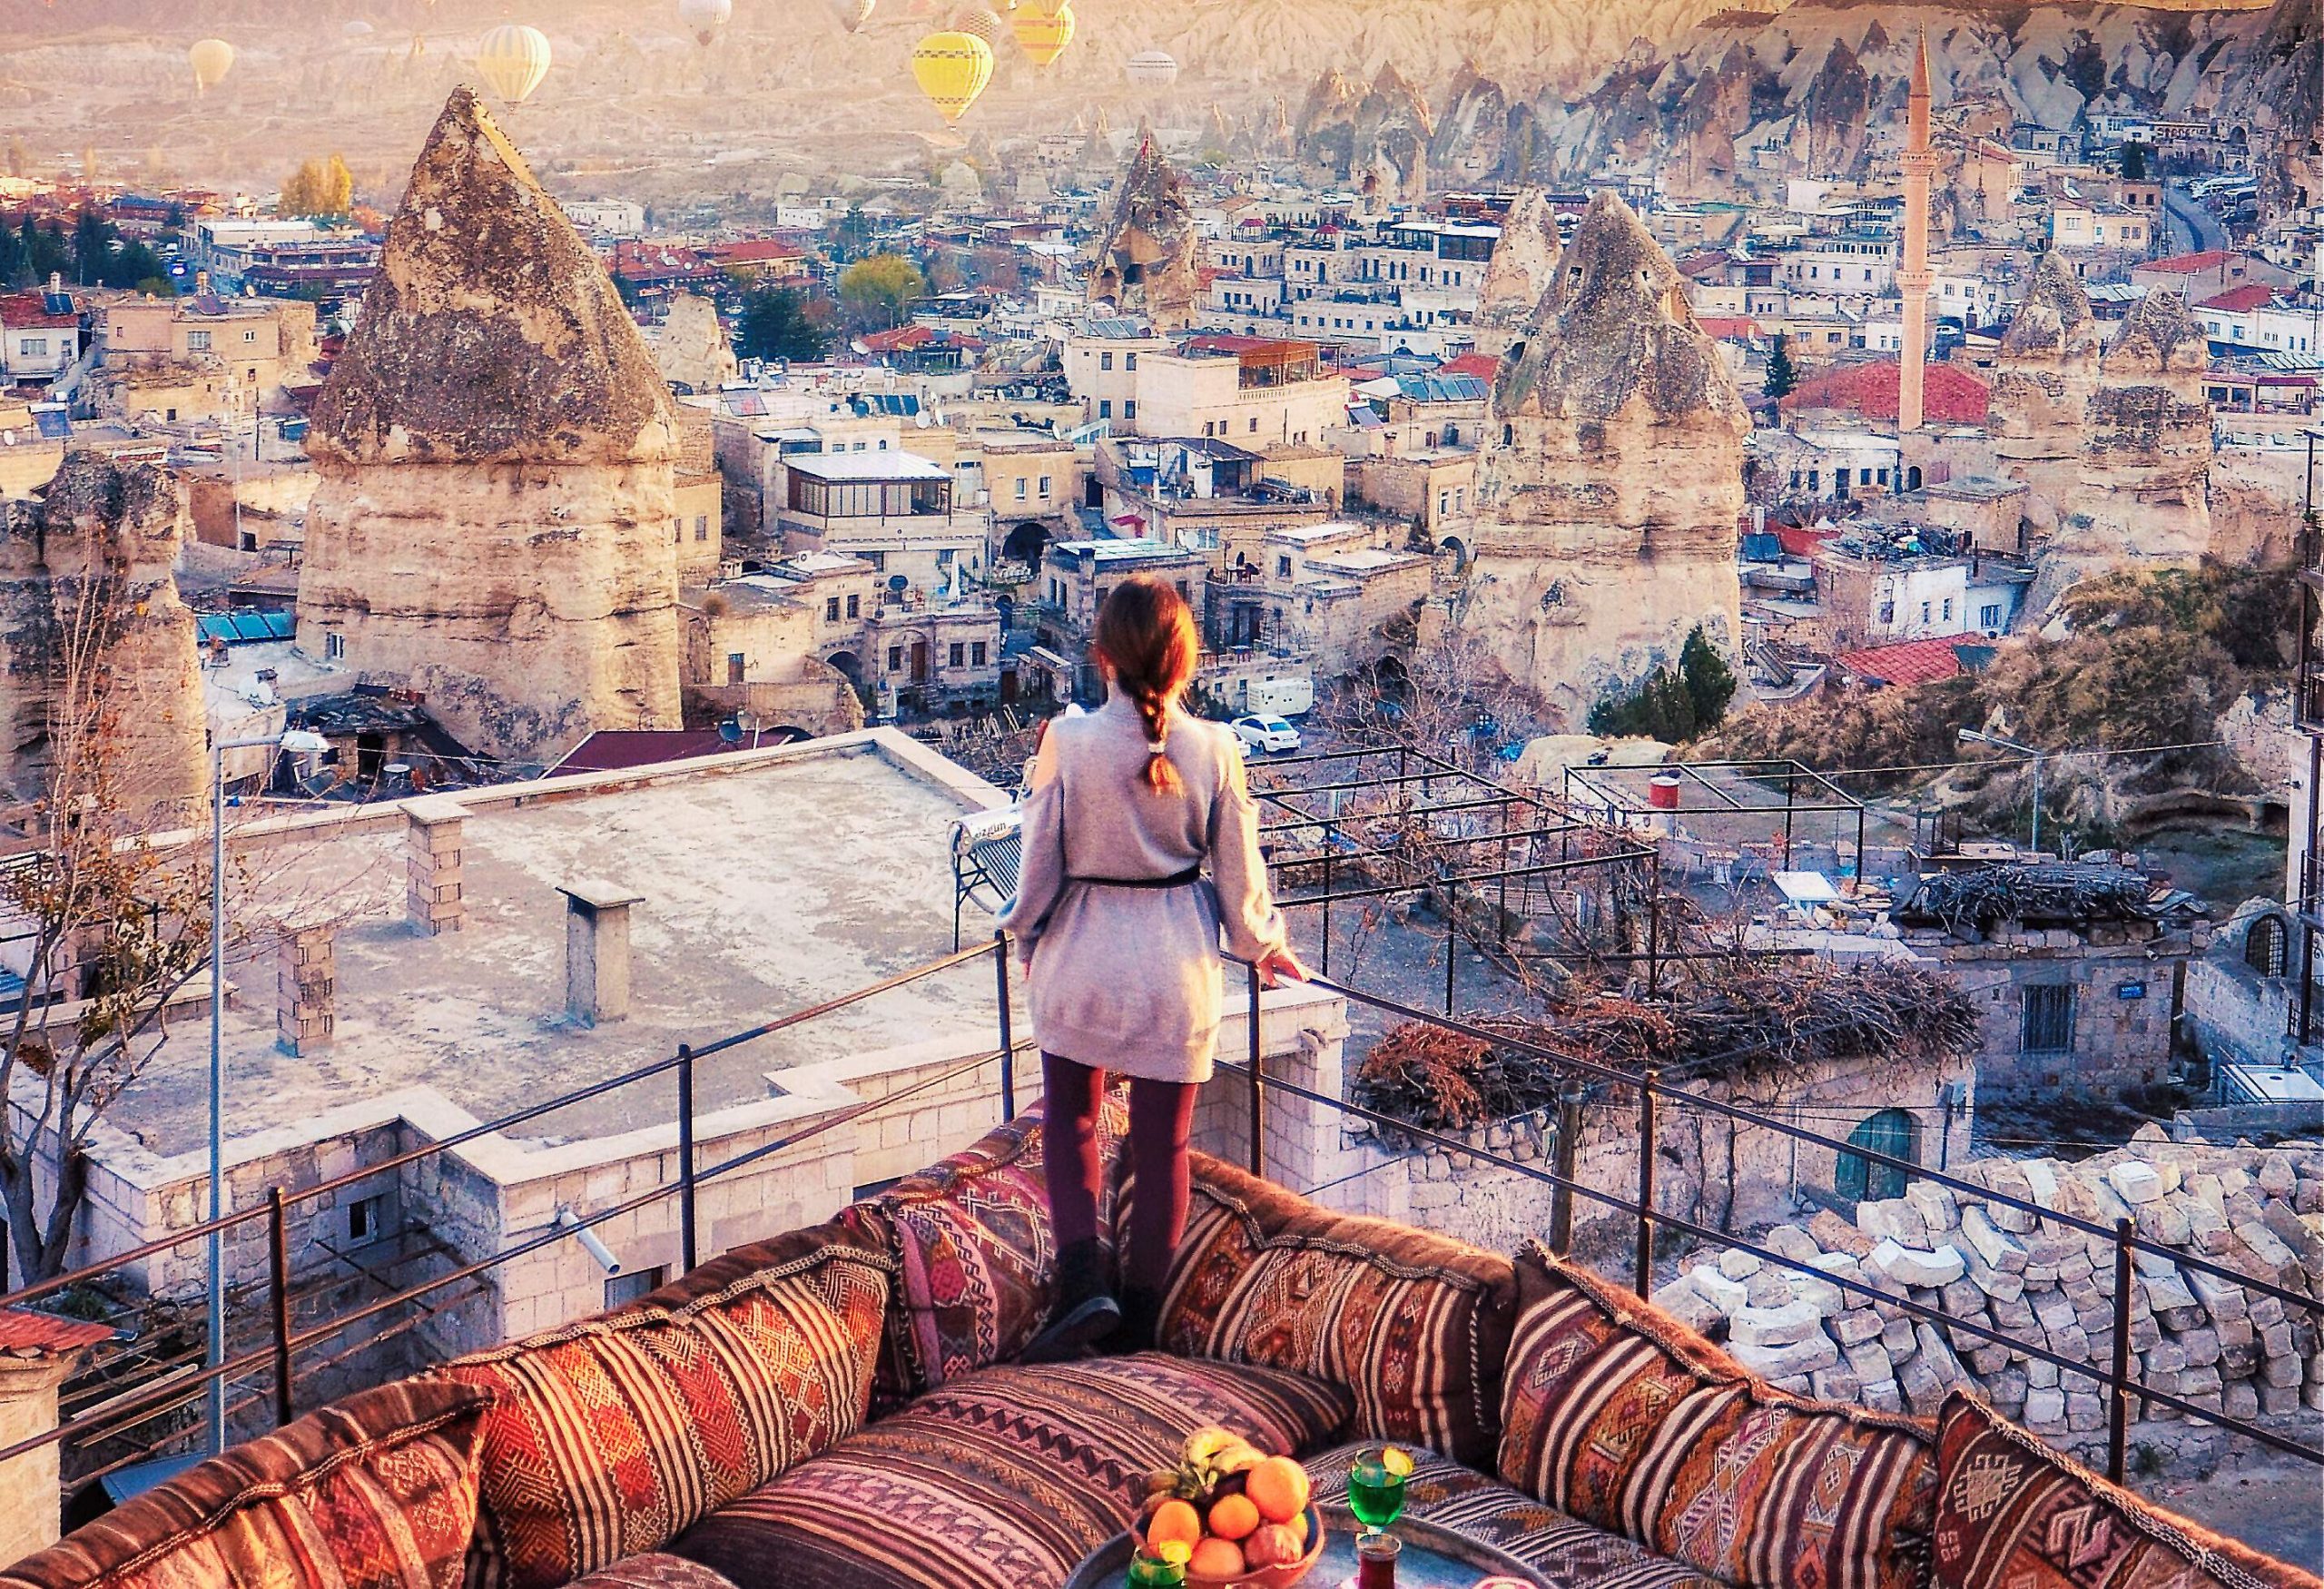 dest_turkey_cappadocia_hot-air-balloons_theme_hotel_gettyimages-1341371666_universal_within-usage-period_98456